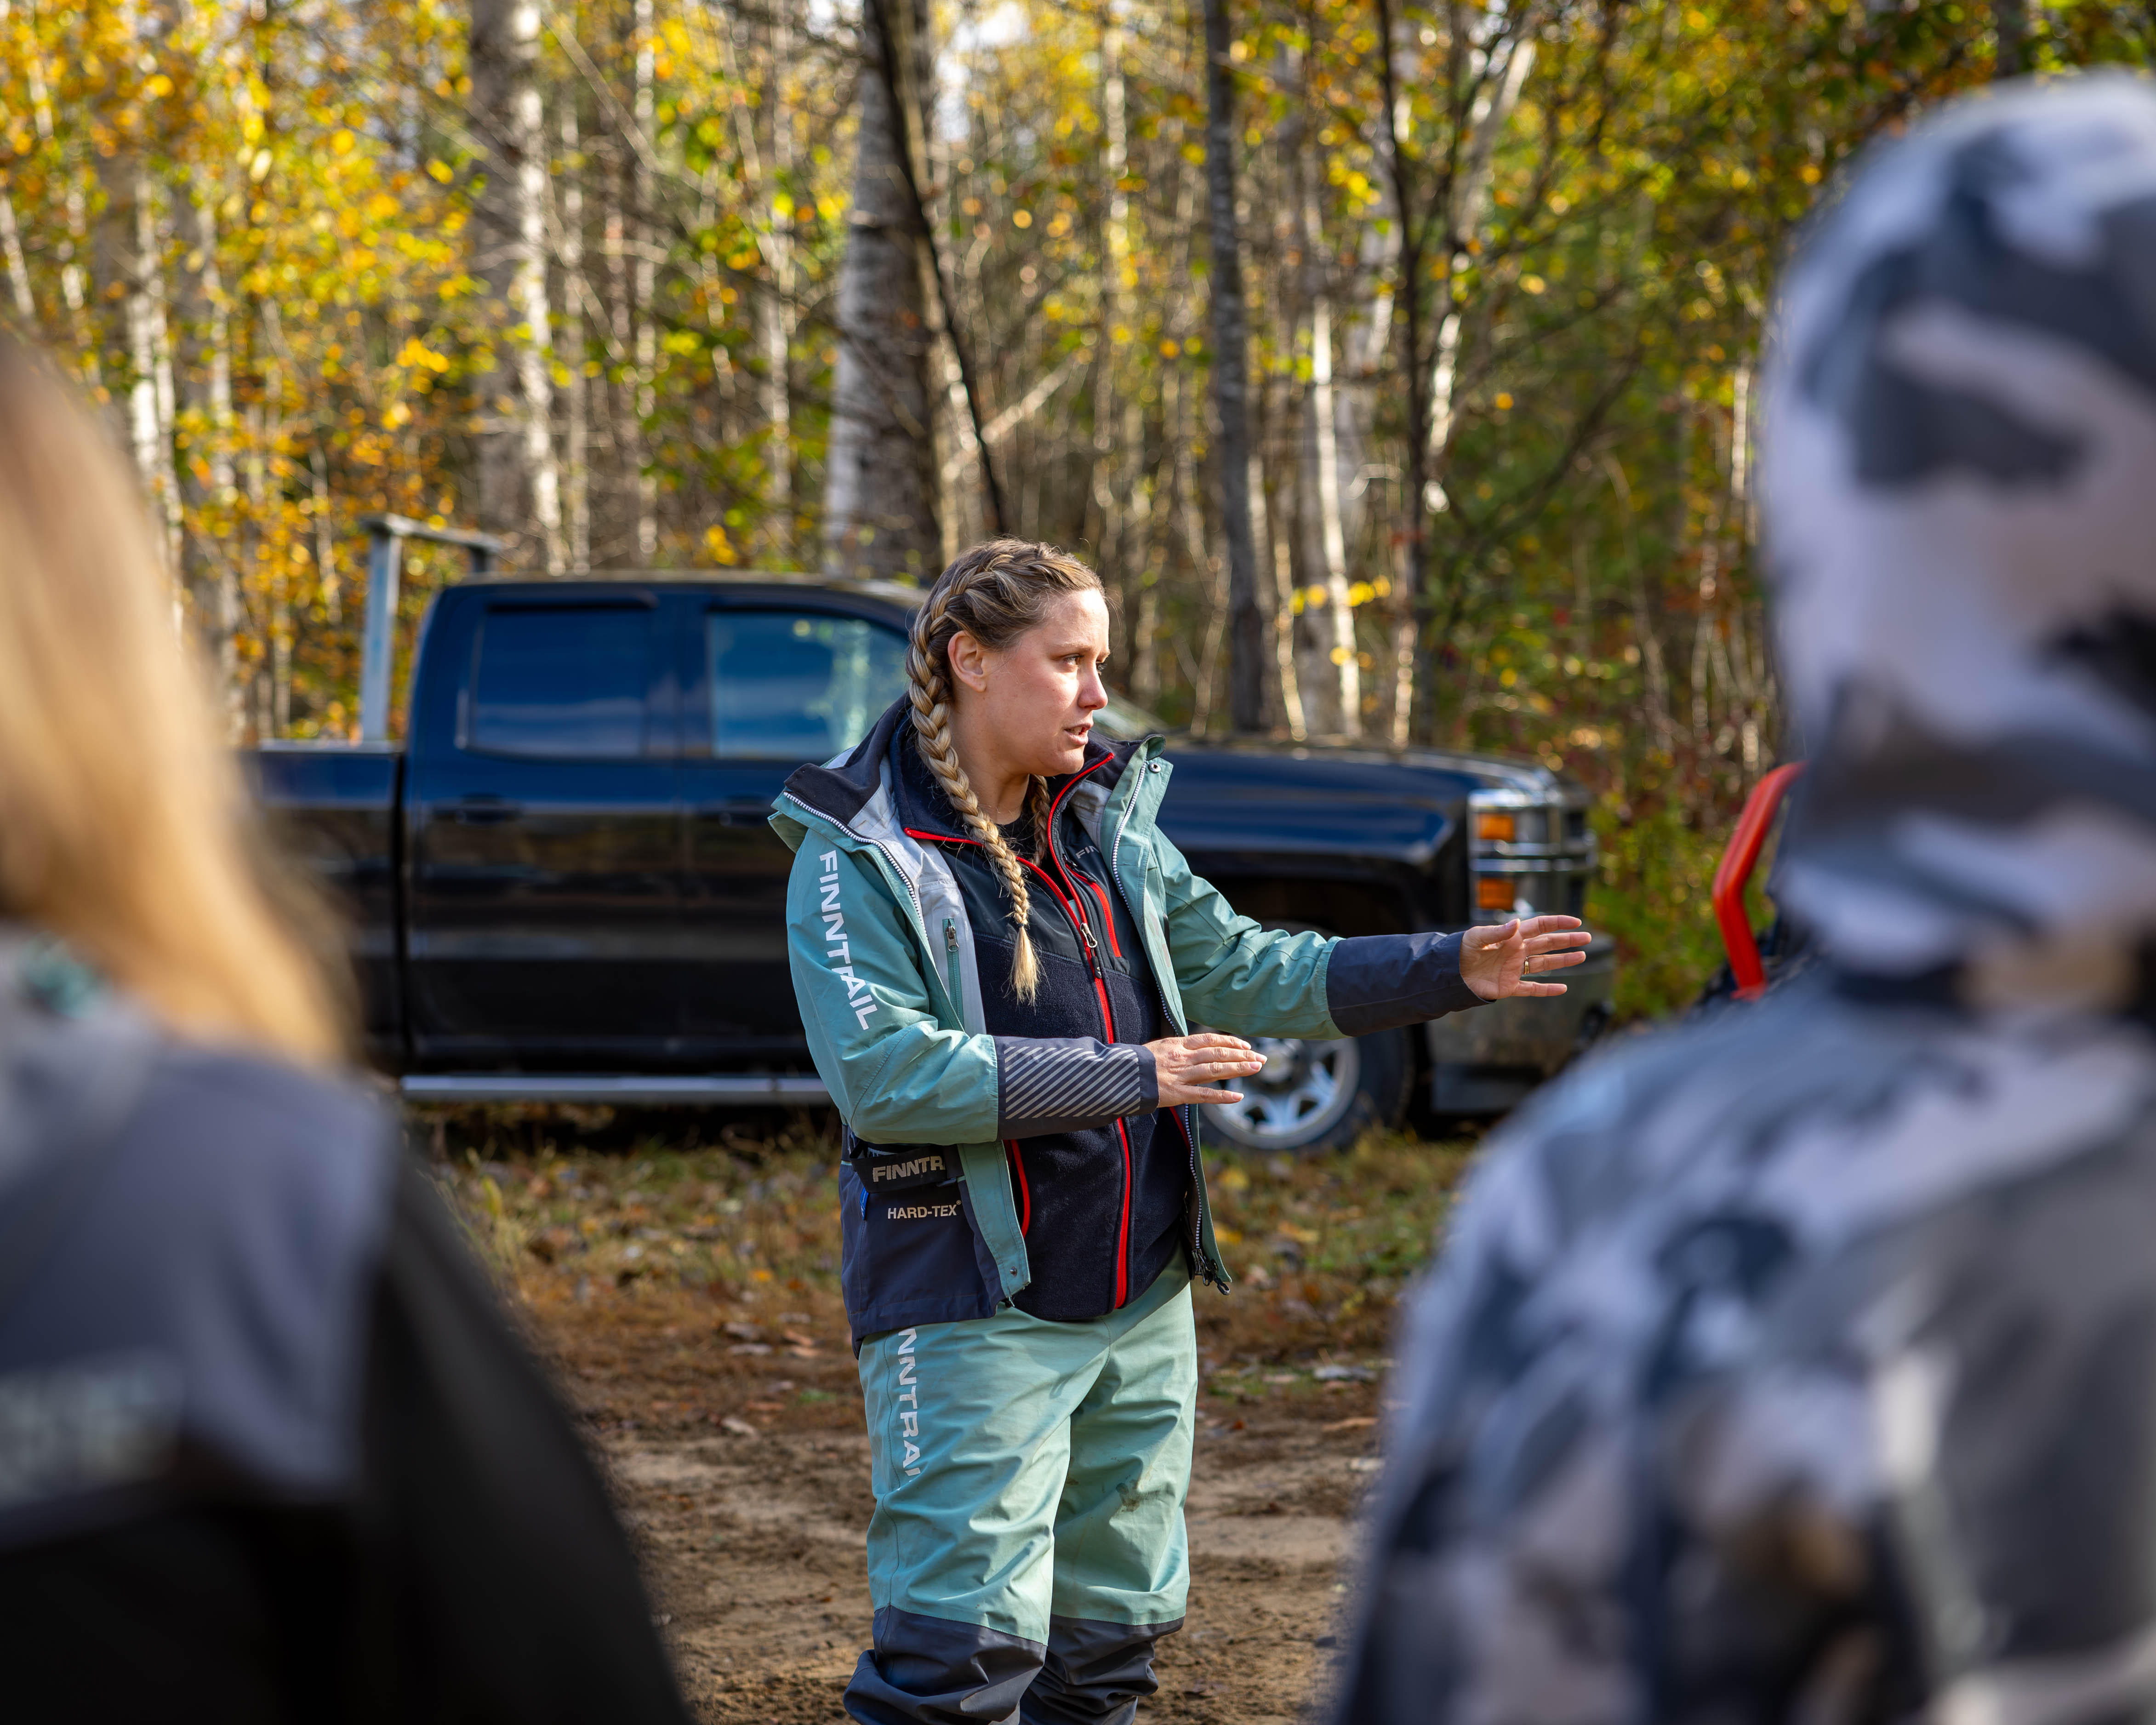 Cassandra Mainville Explains Different Riding Techniques to the Group Before Leaving the Trail Head